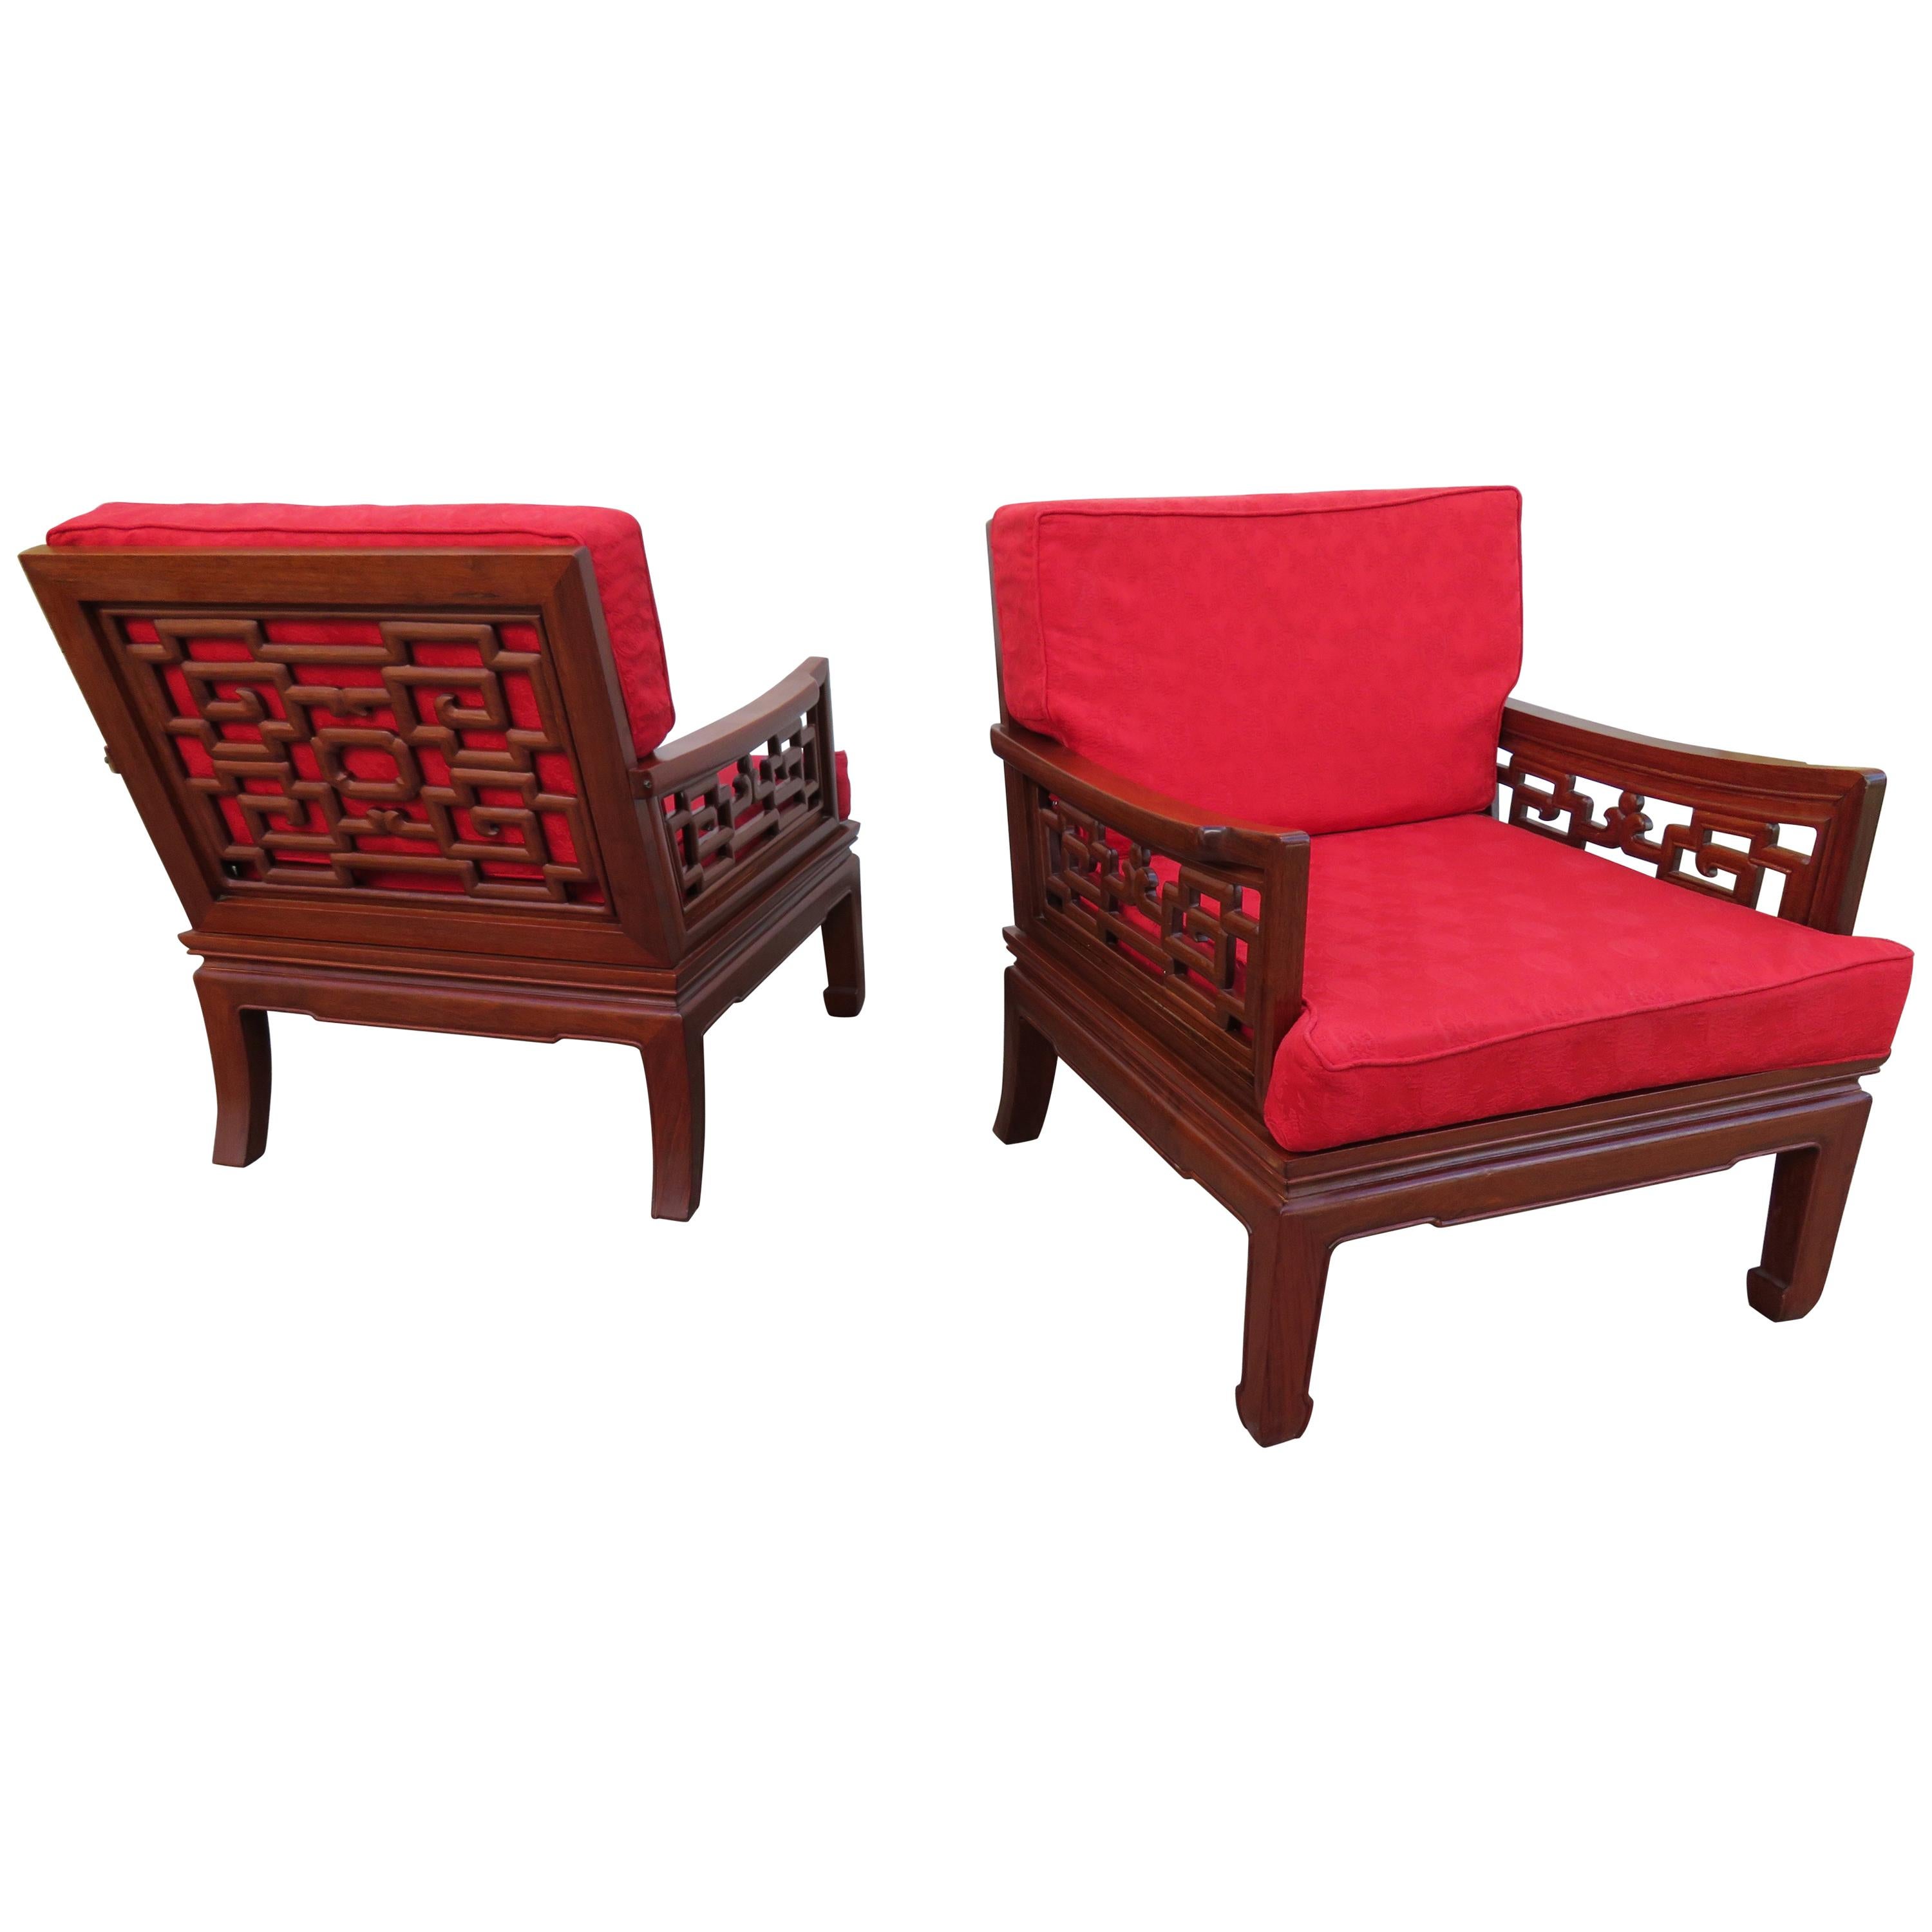 Exquisite Pair of Chinoiserie Ming Style Carved Rosewood Chairs Asian Modern For Sale